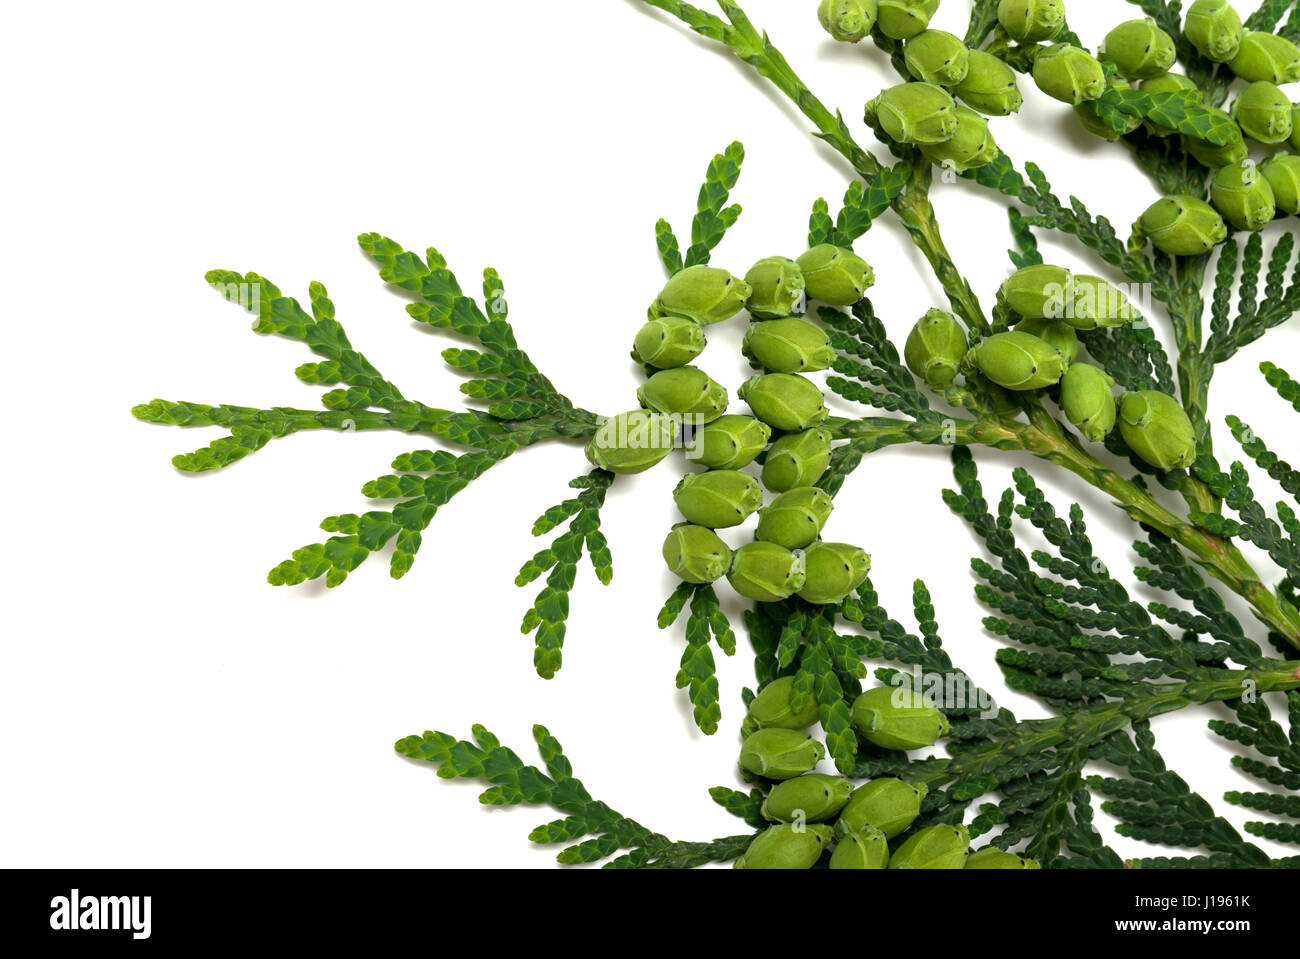 Twig of thuja with green cones isolated on white background. Close-up view. Stock Photo